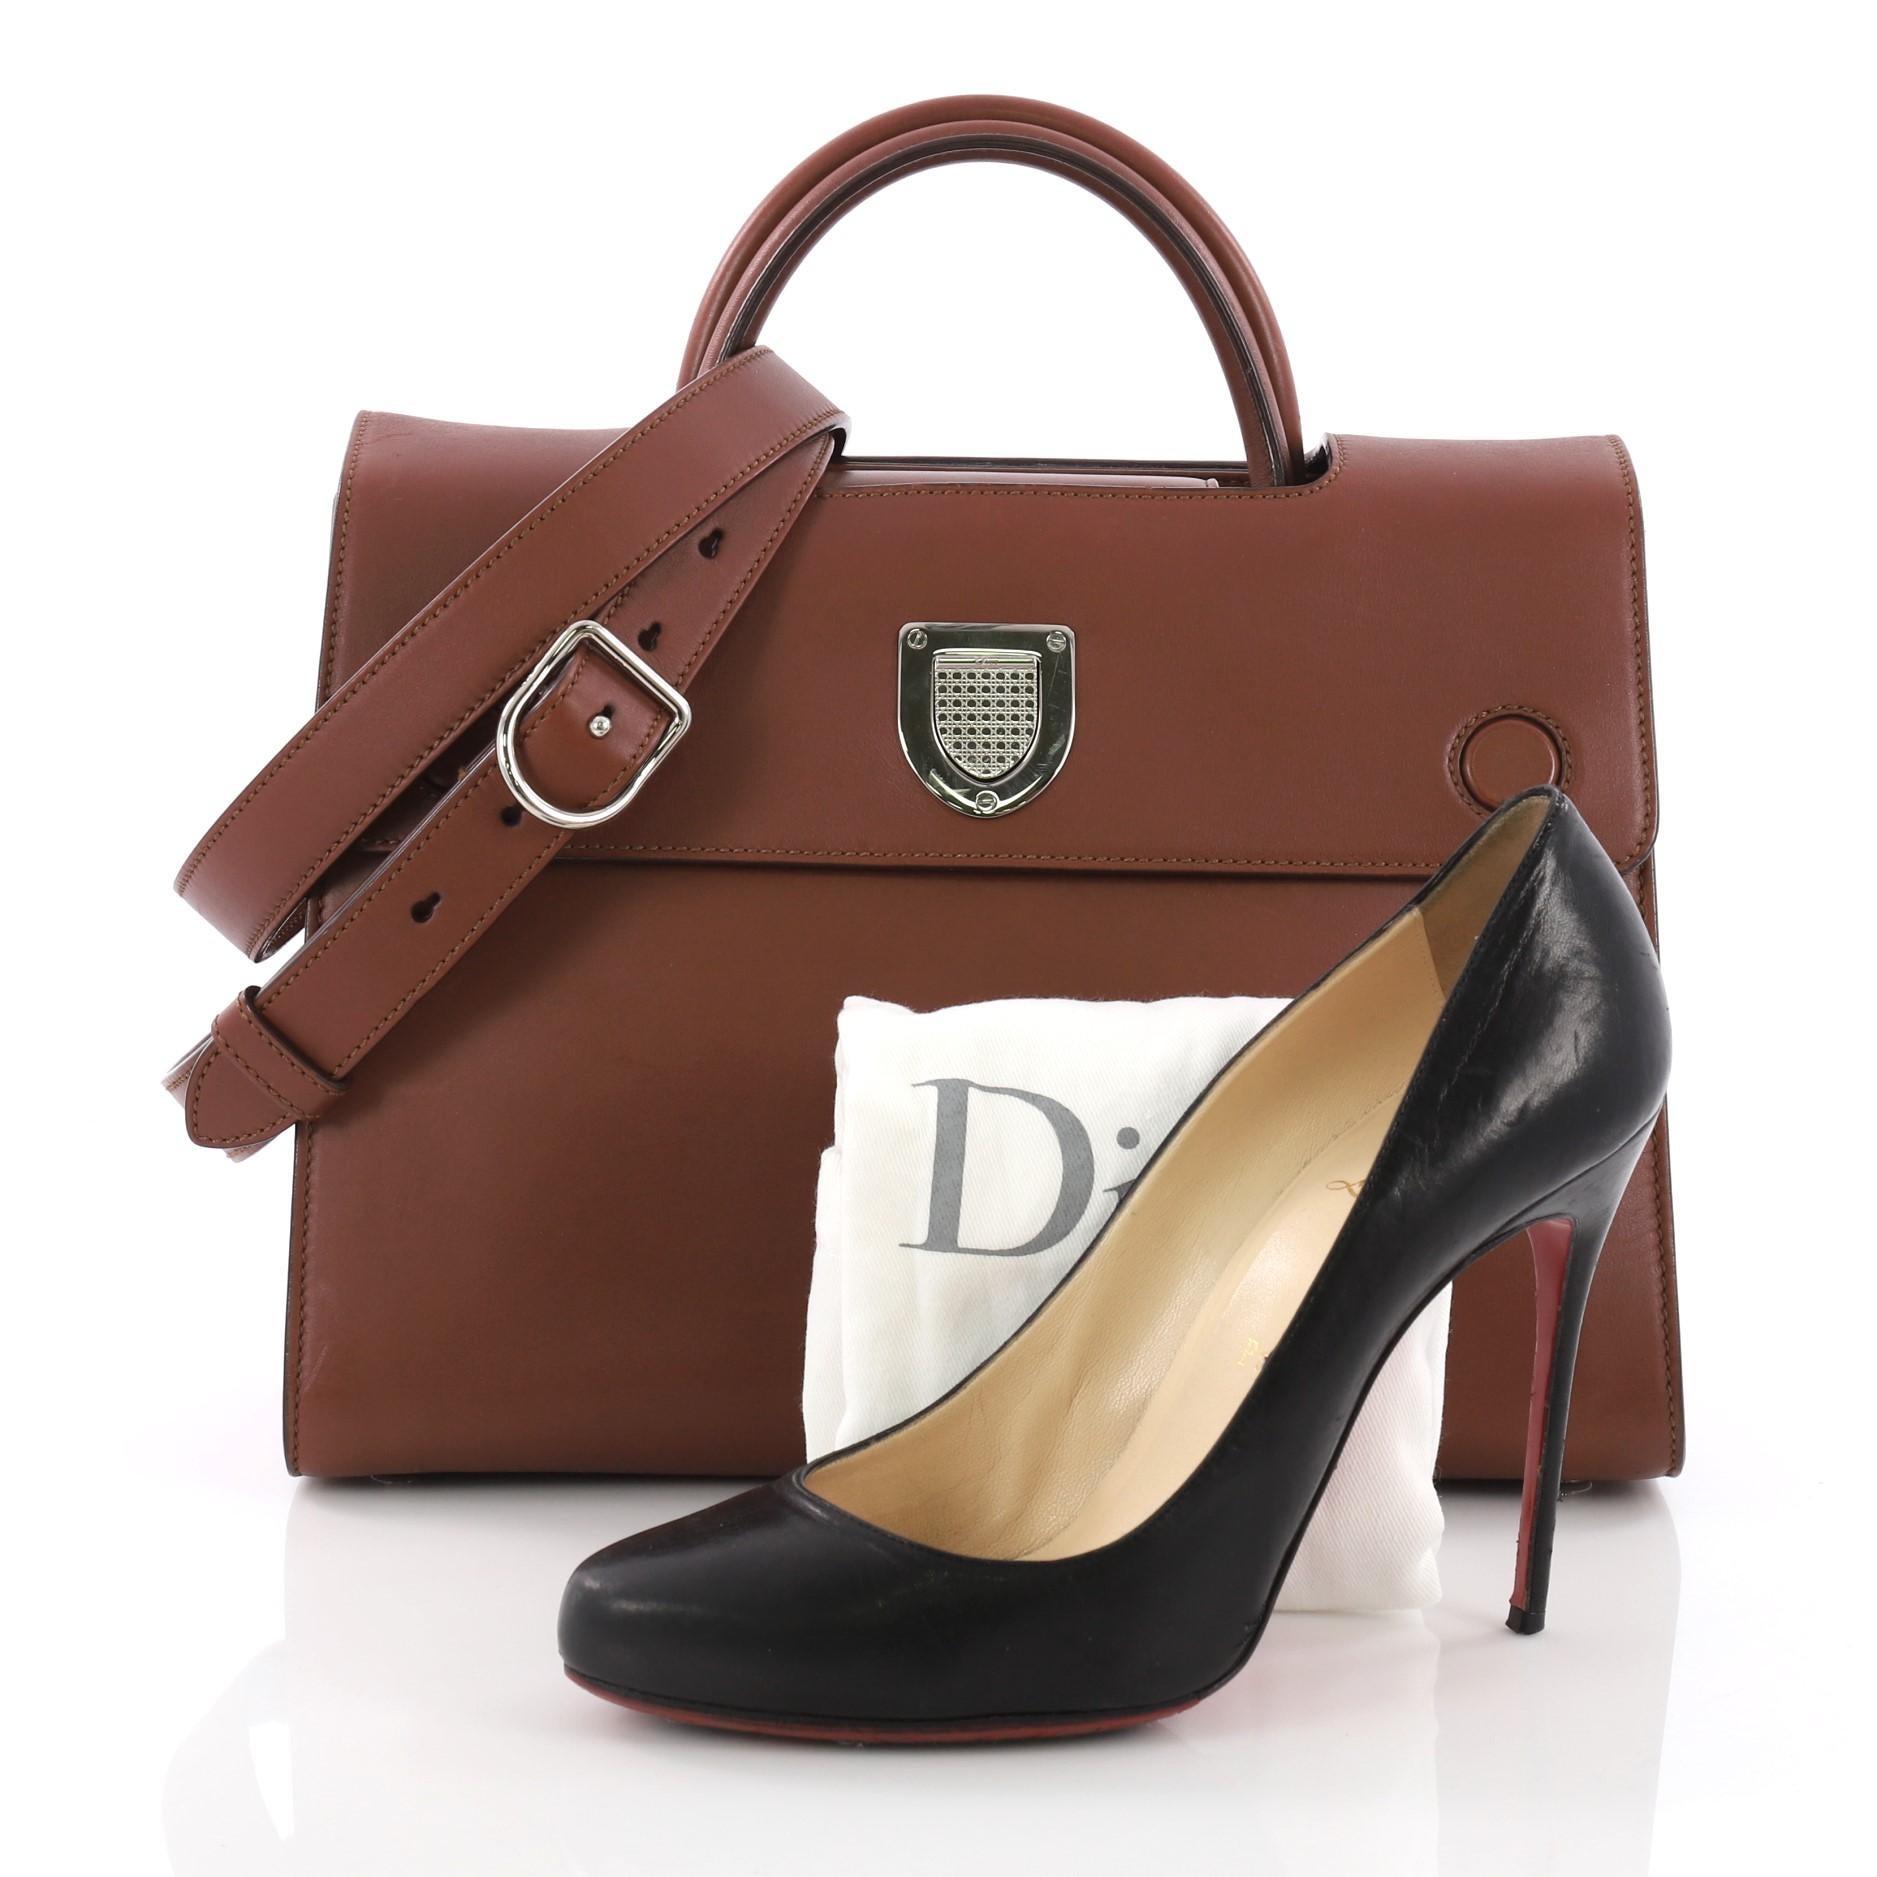 This Christian Dior Diorever Top Handle Bag Leather Medium, crafted in brown leather, features dual rolled leather handles, side snap buttons and silver-tone hardware. Its textured push-lock closure opens to a brown leather interior with slip